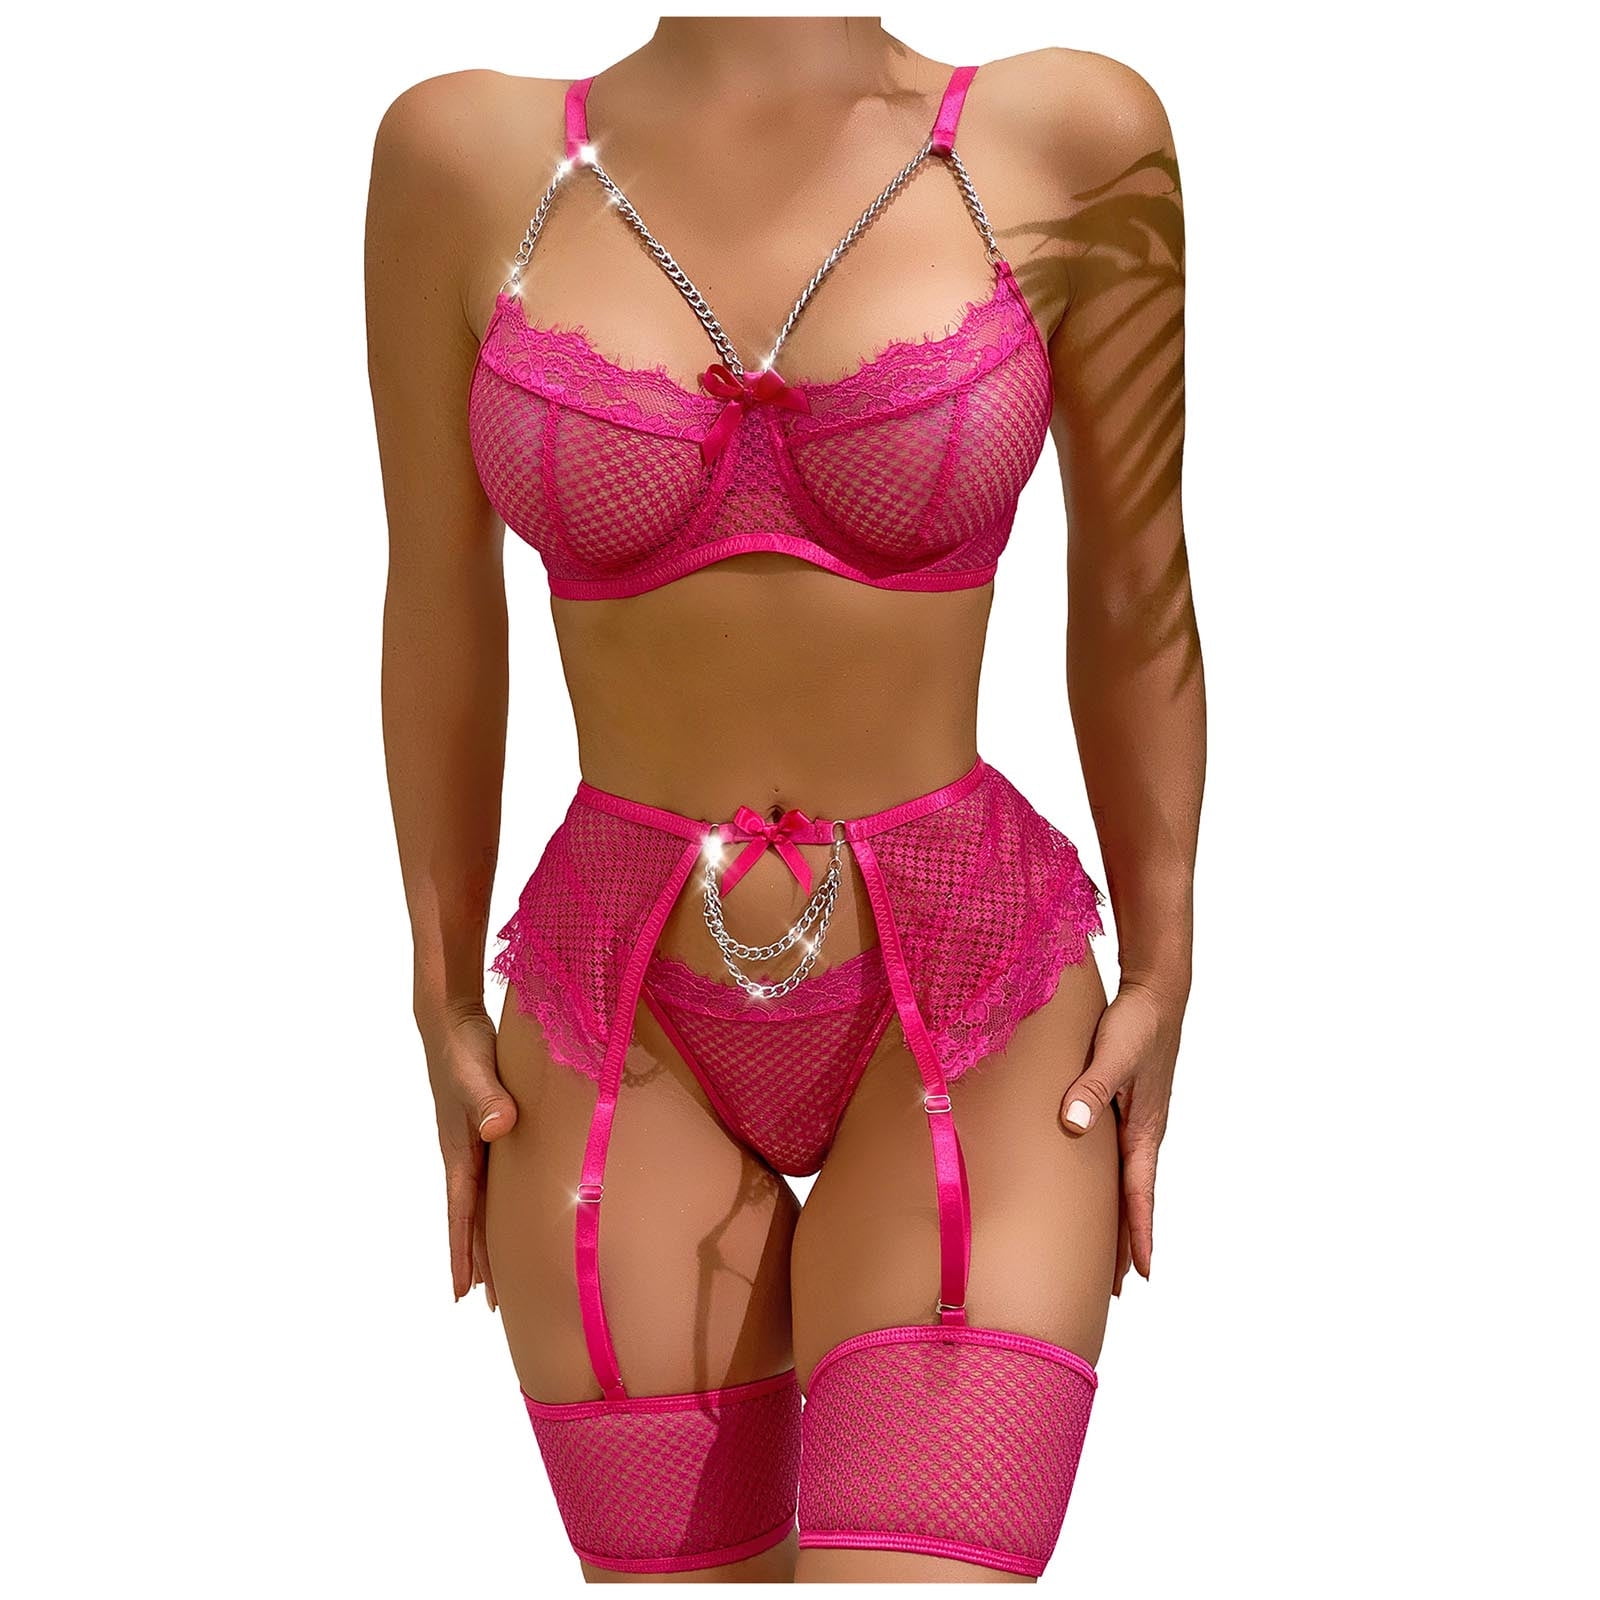 Leesechin Lingerie for Women Clearance Bodysuit Nightdress Babydoll  Underwear Lace Bowknot Perspective Sleepwear Intimates Thong with Garter  Panty Set 